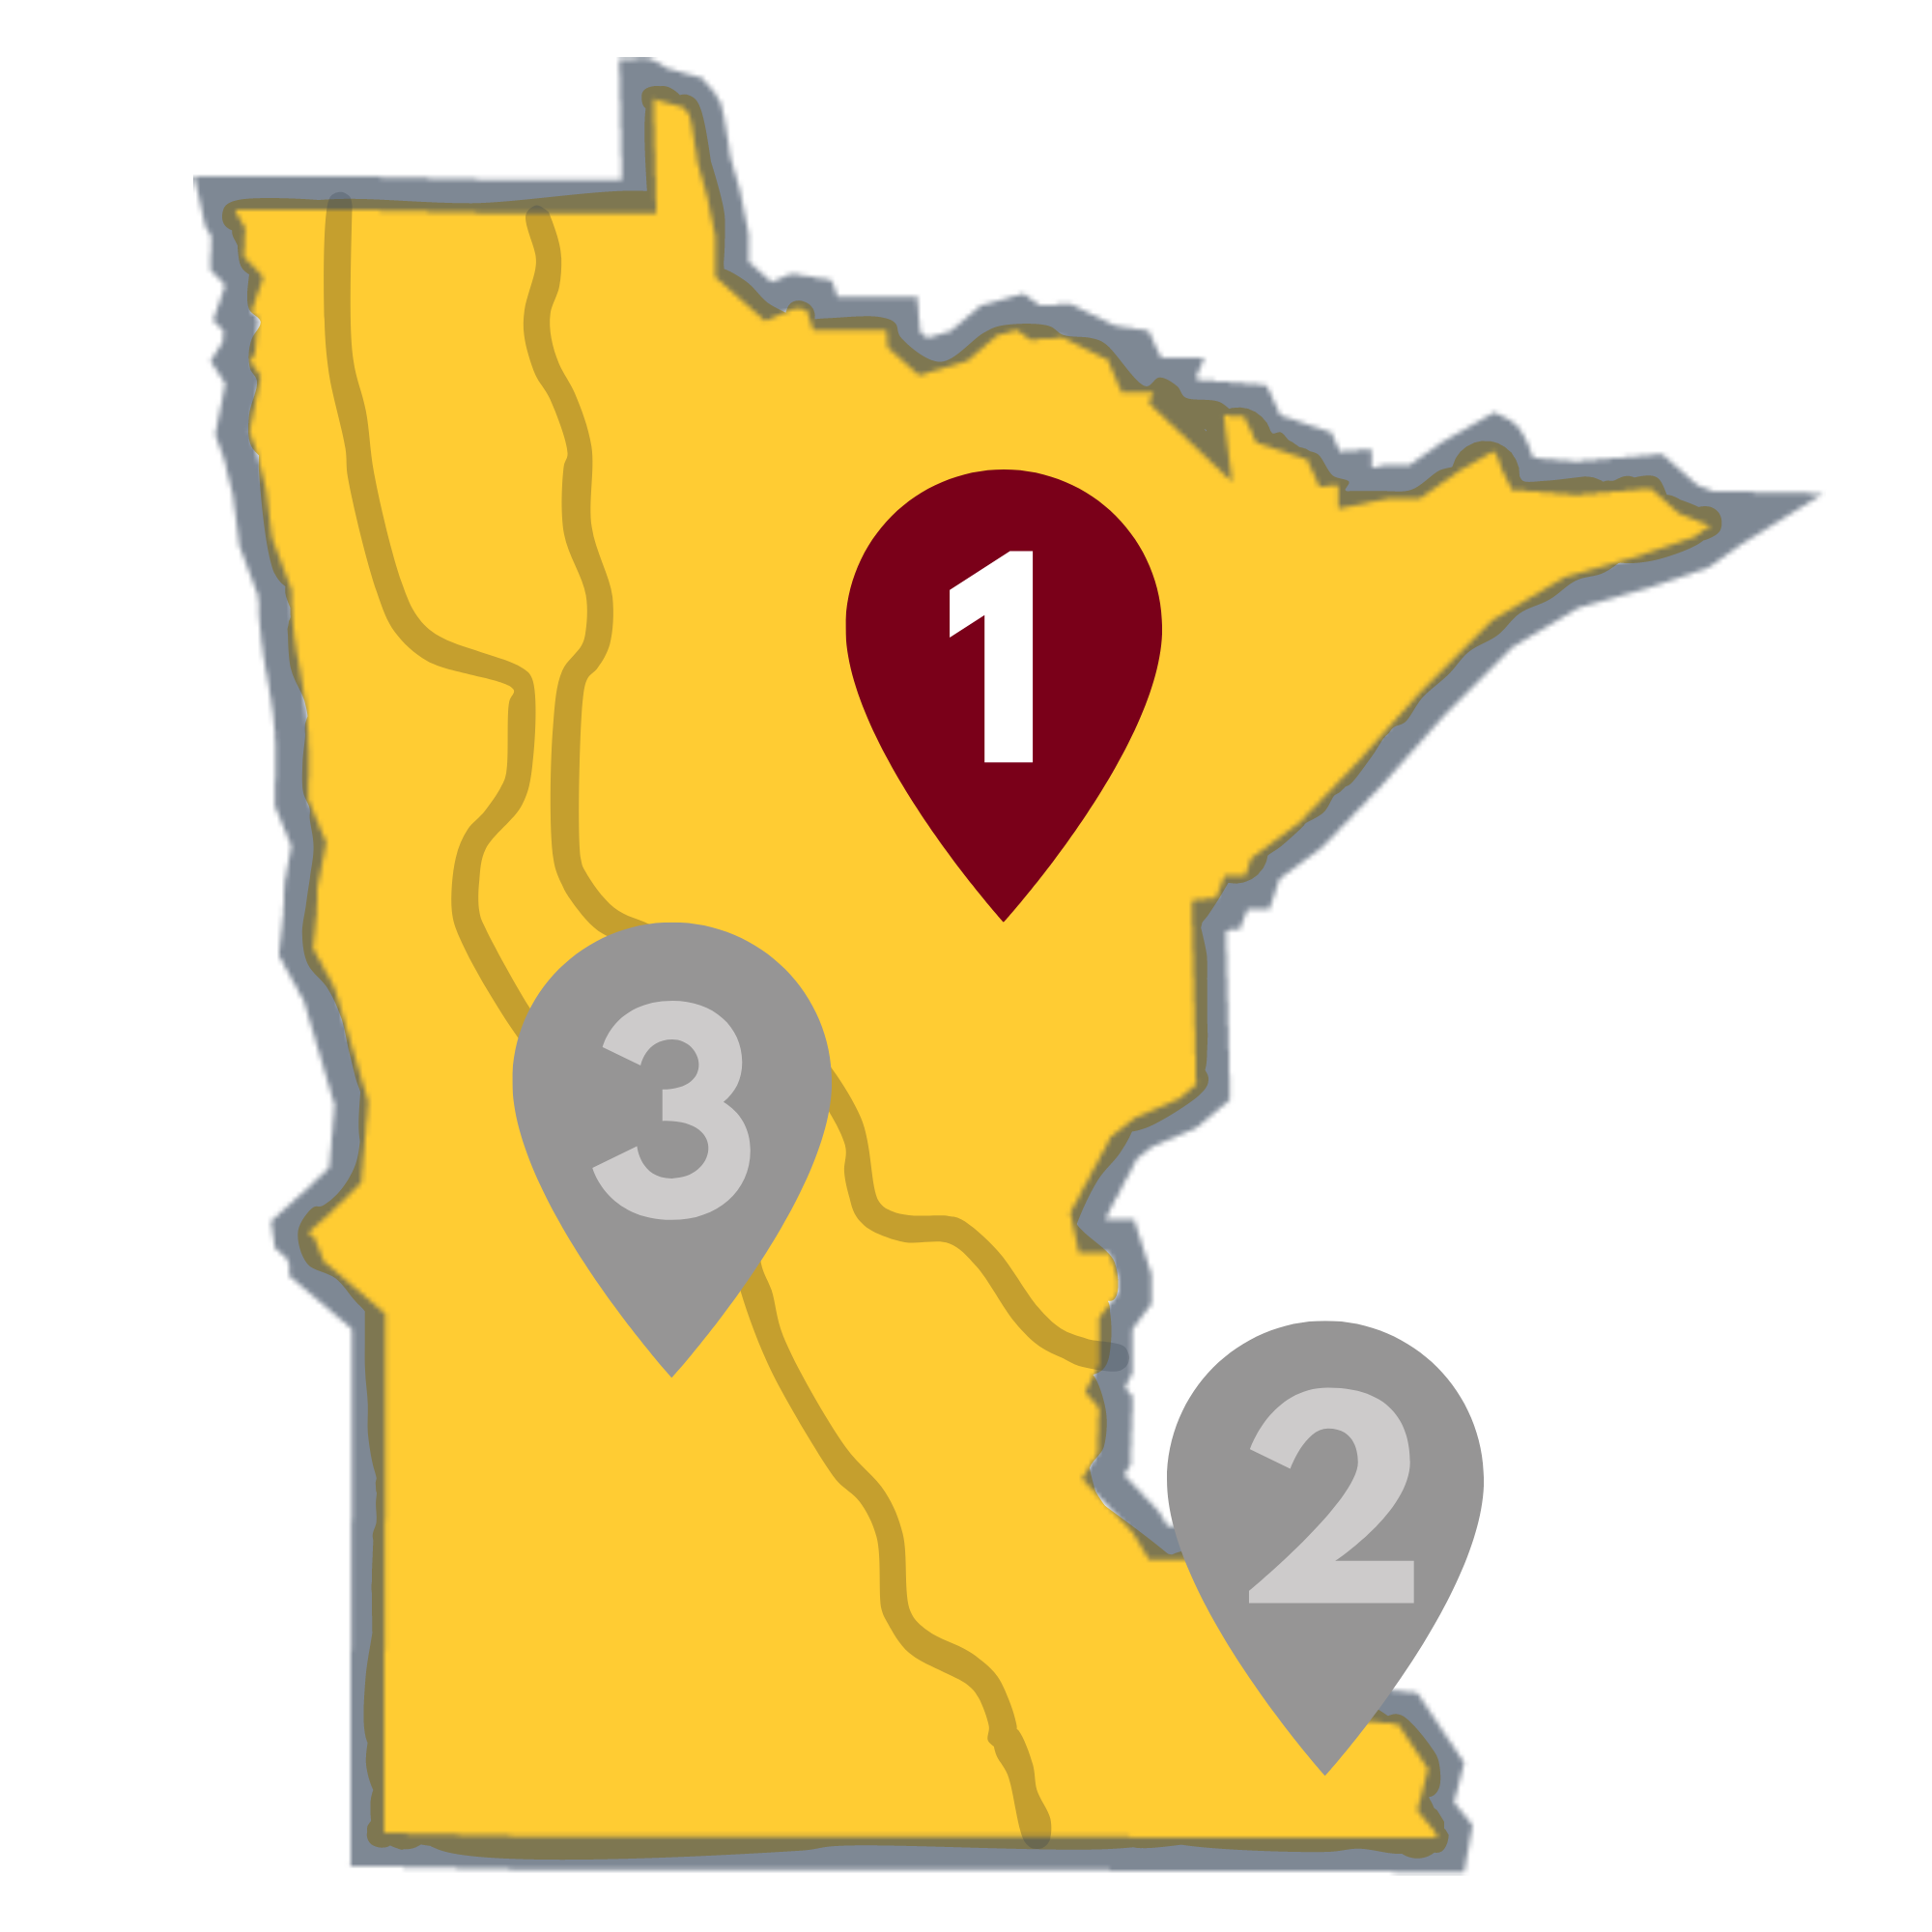 Yellow state of Minnesota with a maroon place marker (1) in the northeast.